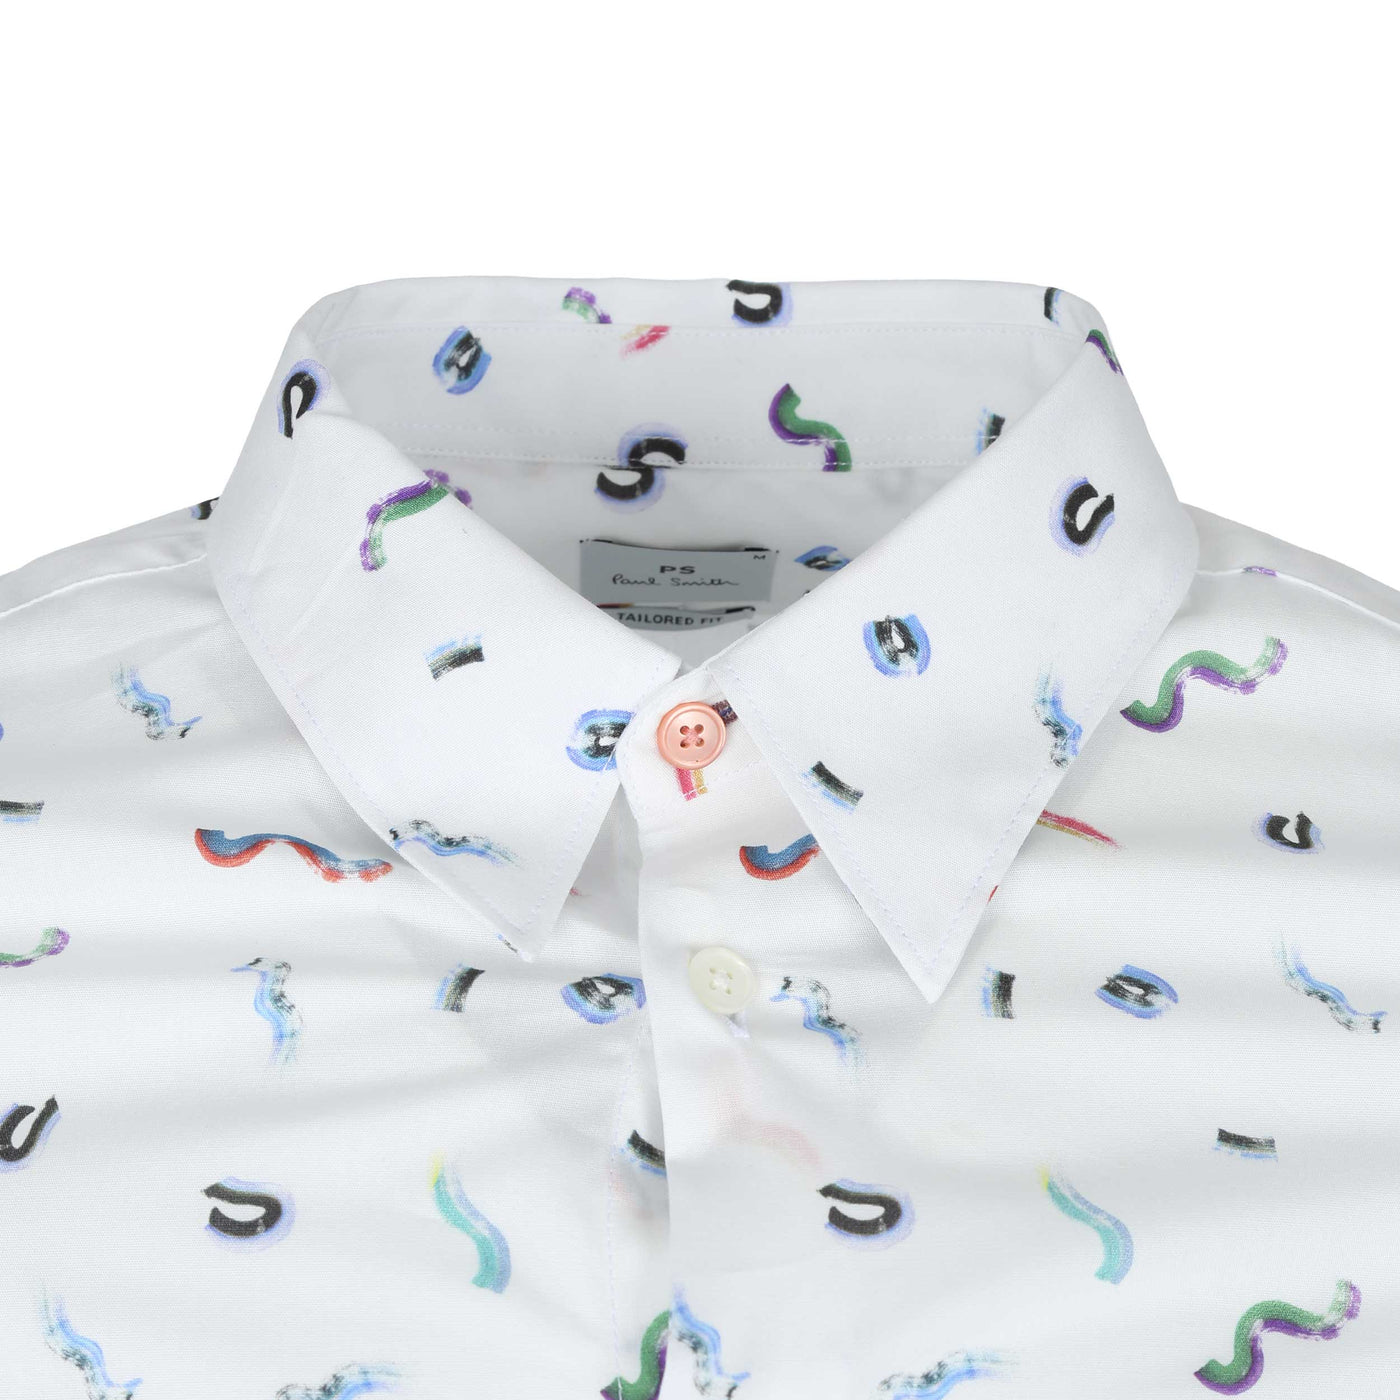 Paul Smith Tailored Fit Shirt in White Pattern